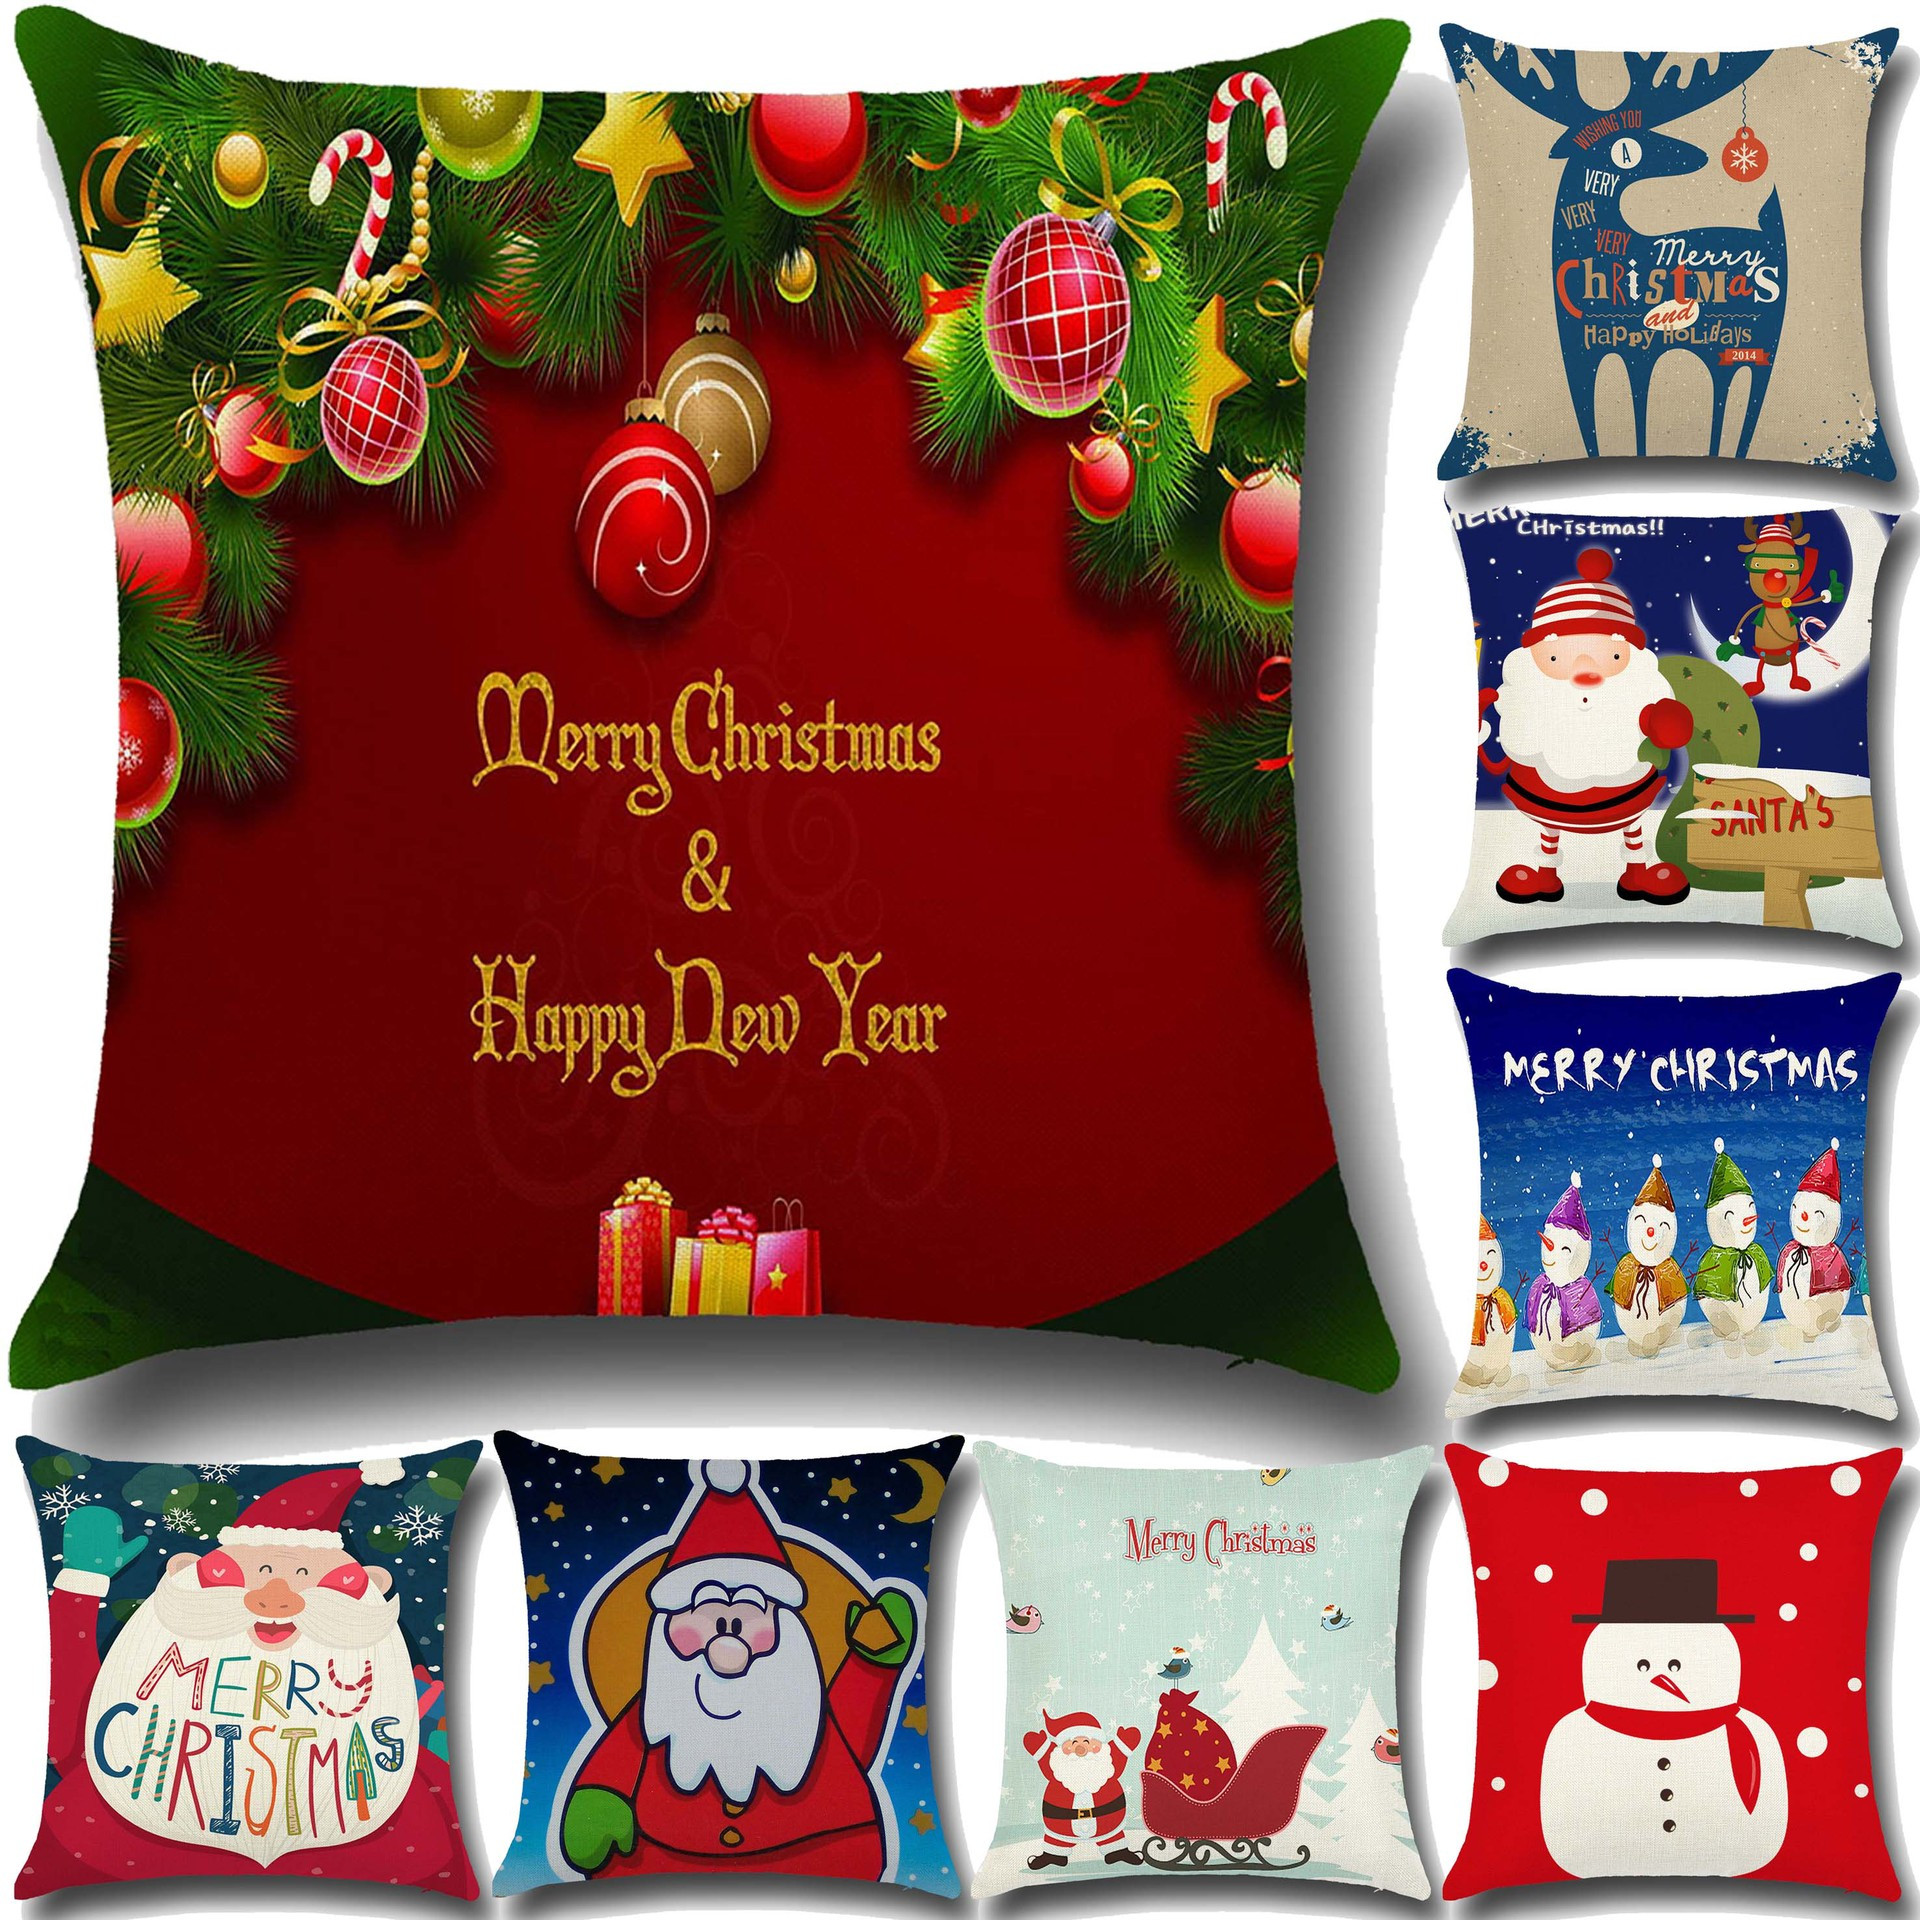 Outdoor Christmas Pillows
 line Buy Wholesale outdoor christmas pillows from China